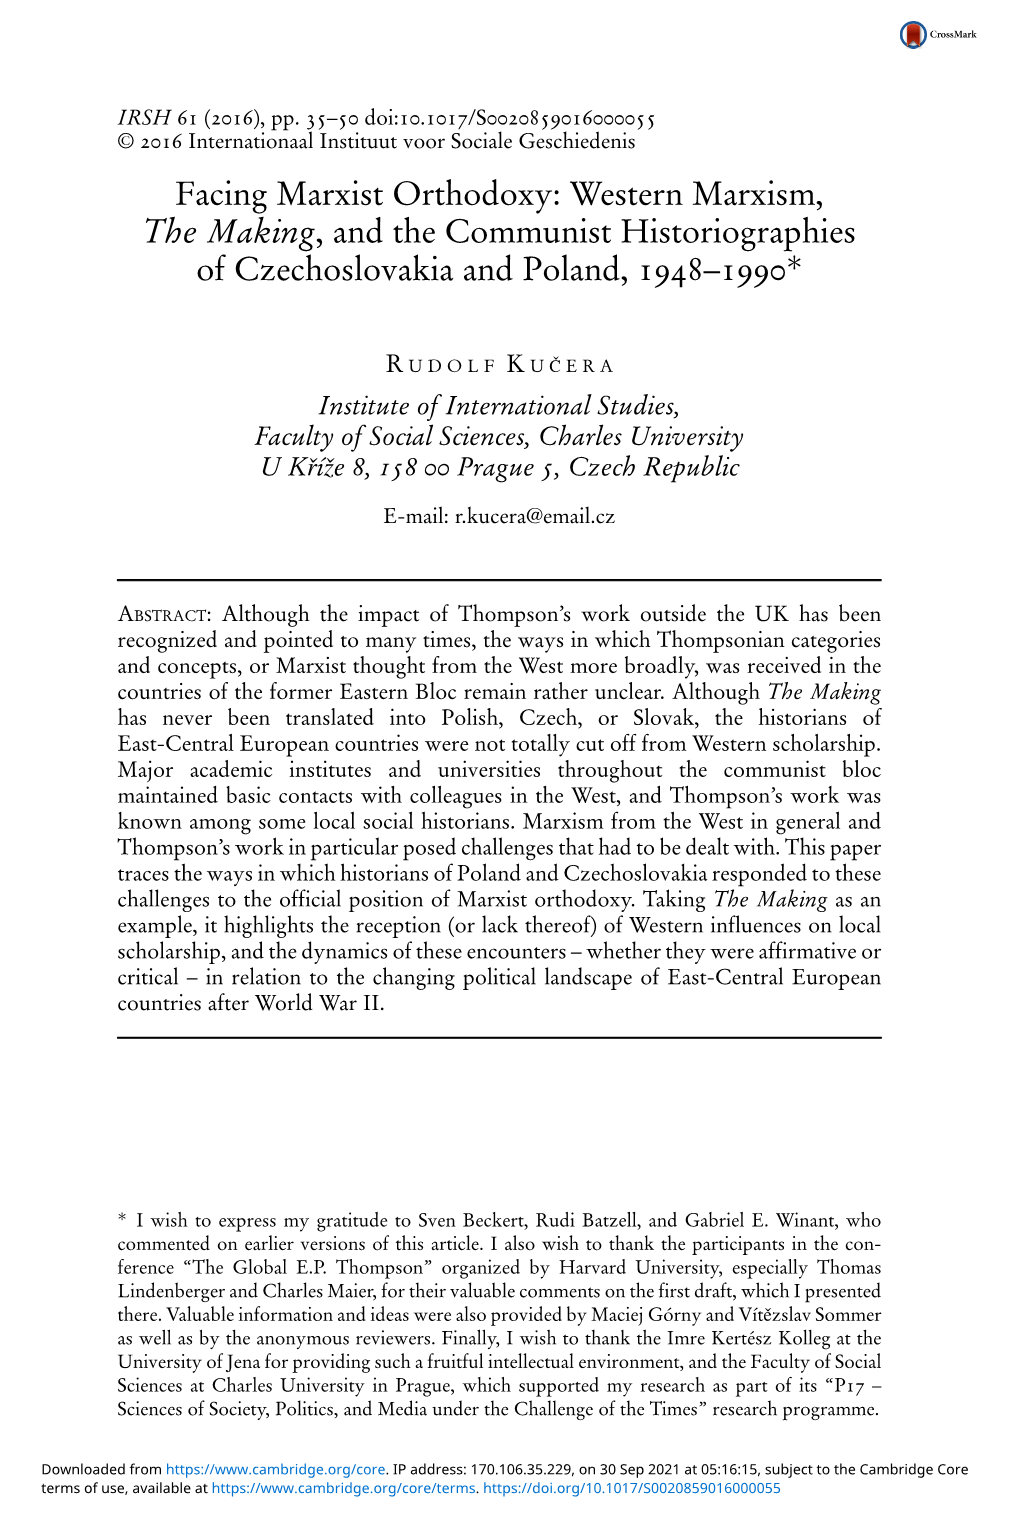 Facing Marxist Orthodoxy: Western Marxism, the Making, and the Communist Historiographies of Czechoslovakia and Poland, 1948–1990*